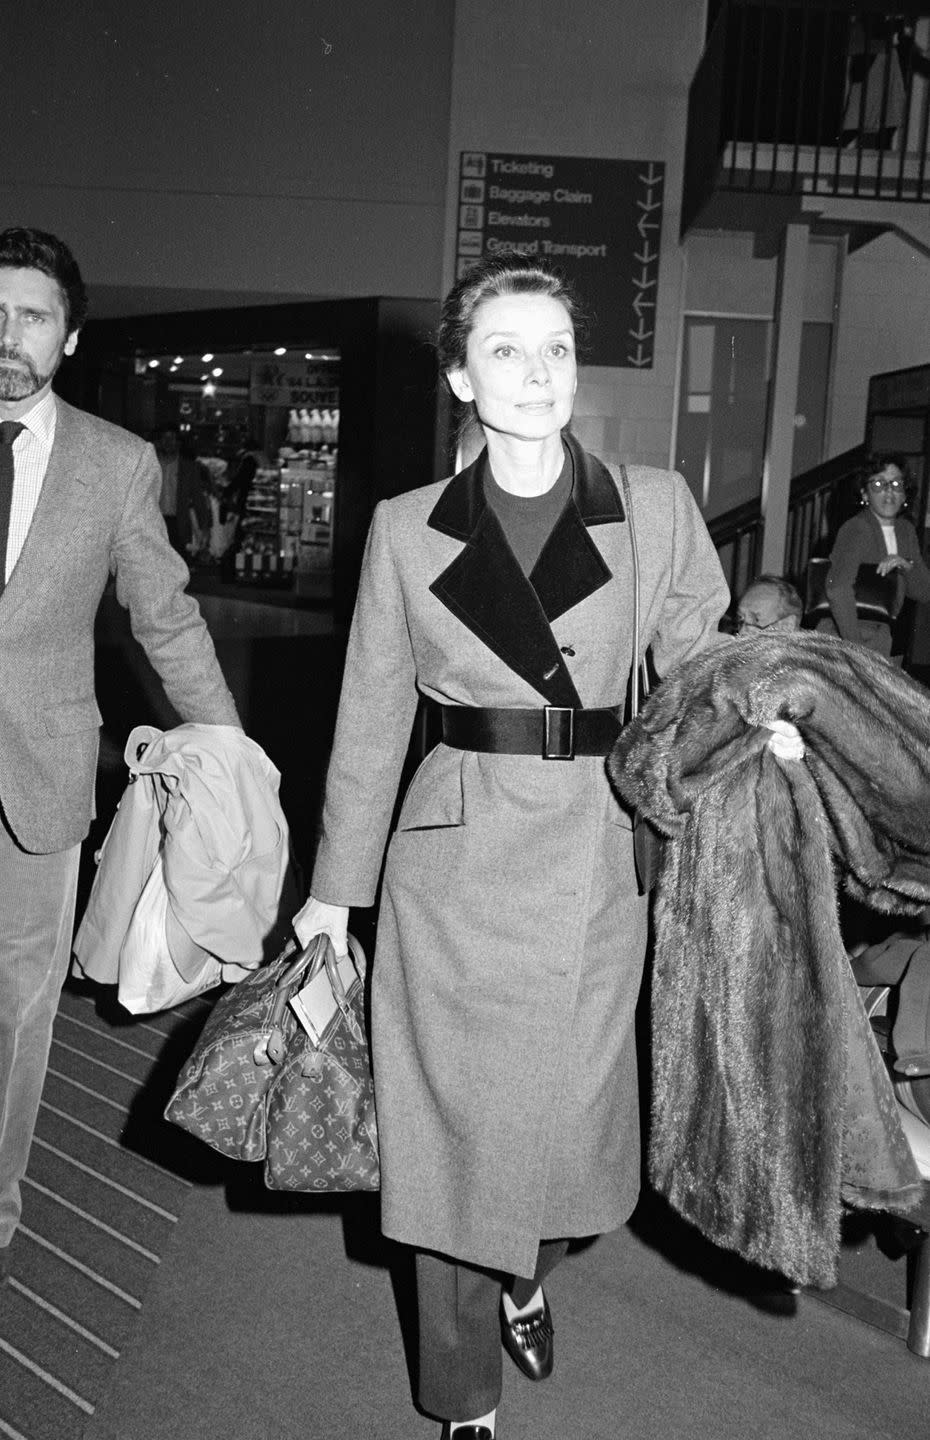 <p>A Louis Vuitton bag is often the go-to airport carry-on for celebrities, but it was particularly chic when Audrey Hepburn did it in '84. </p>